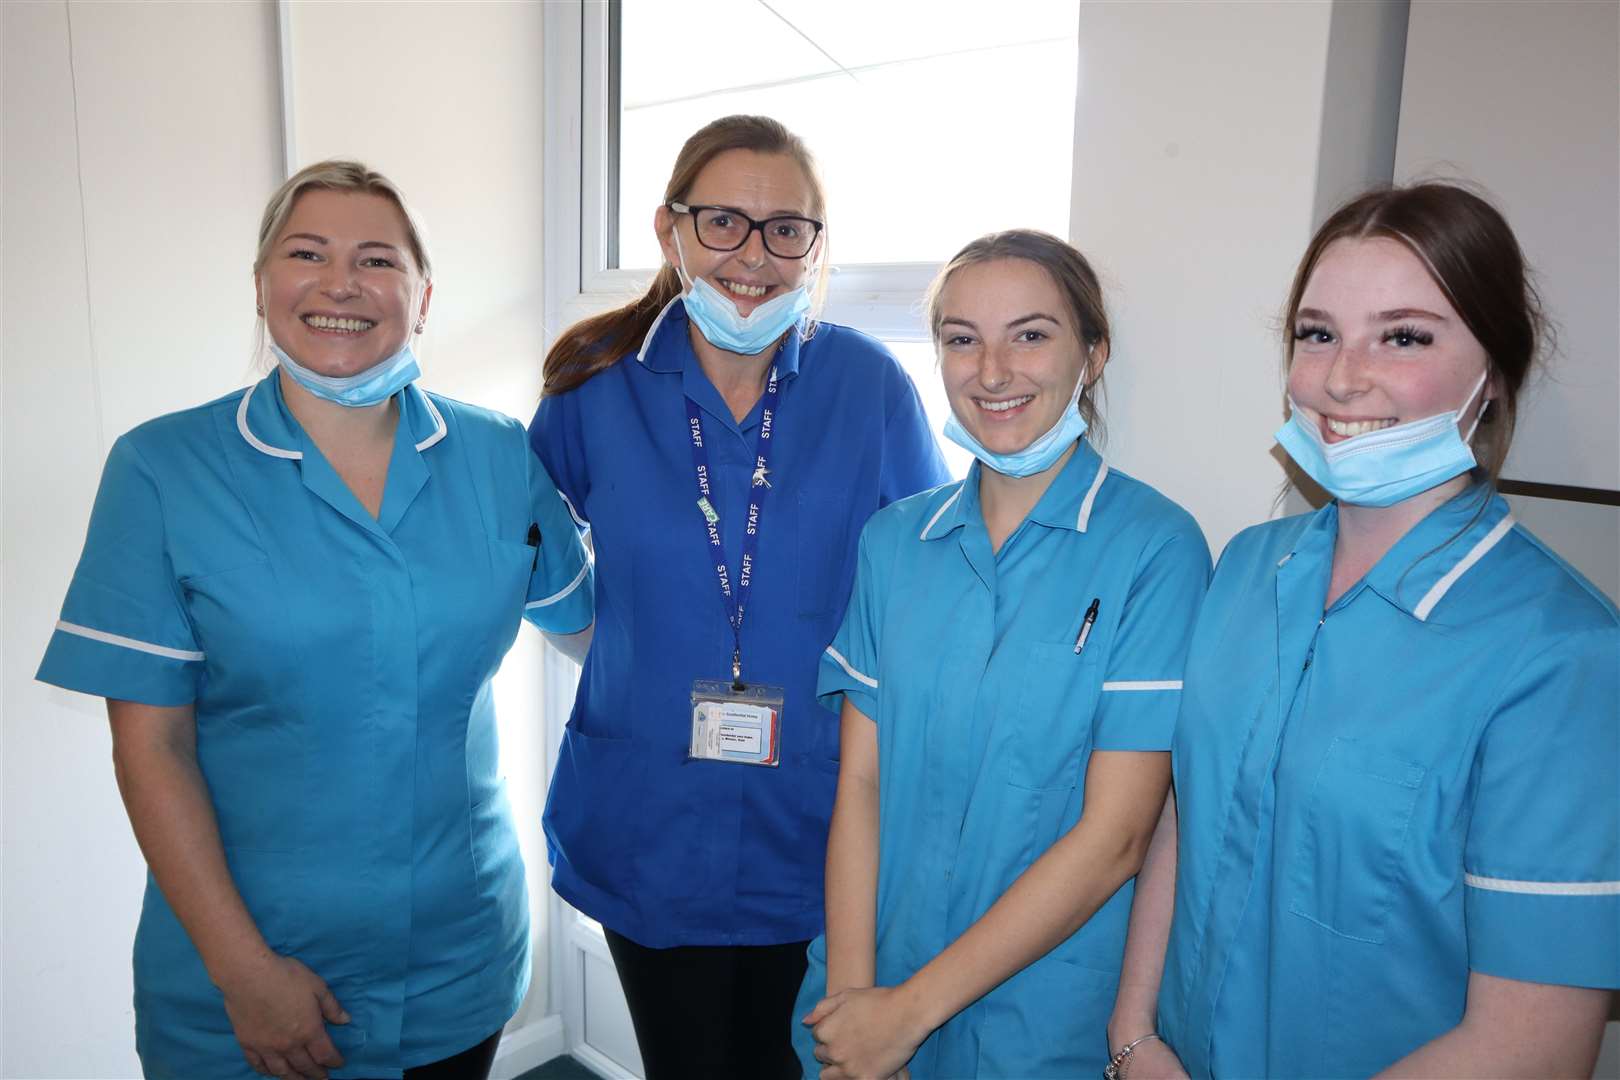 Some Little Oyster residential home staff, from the left, Samantha Sullivan, Caroline Ashby, Lucy Bailey and Rebecca Goodearl